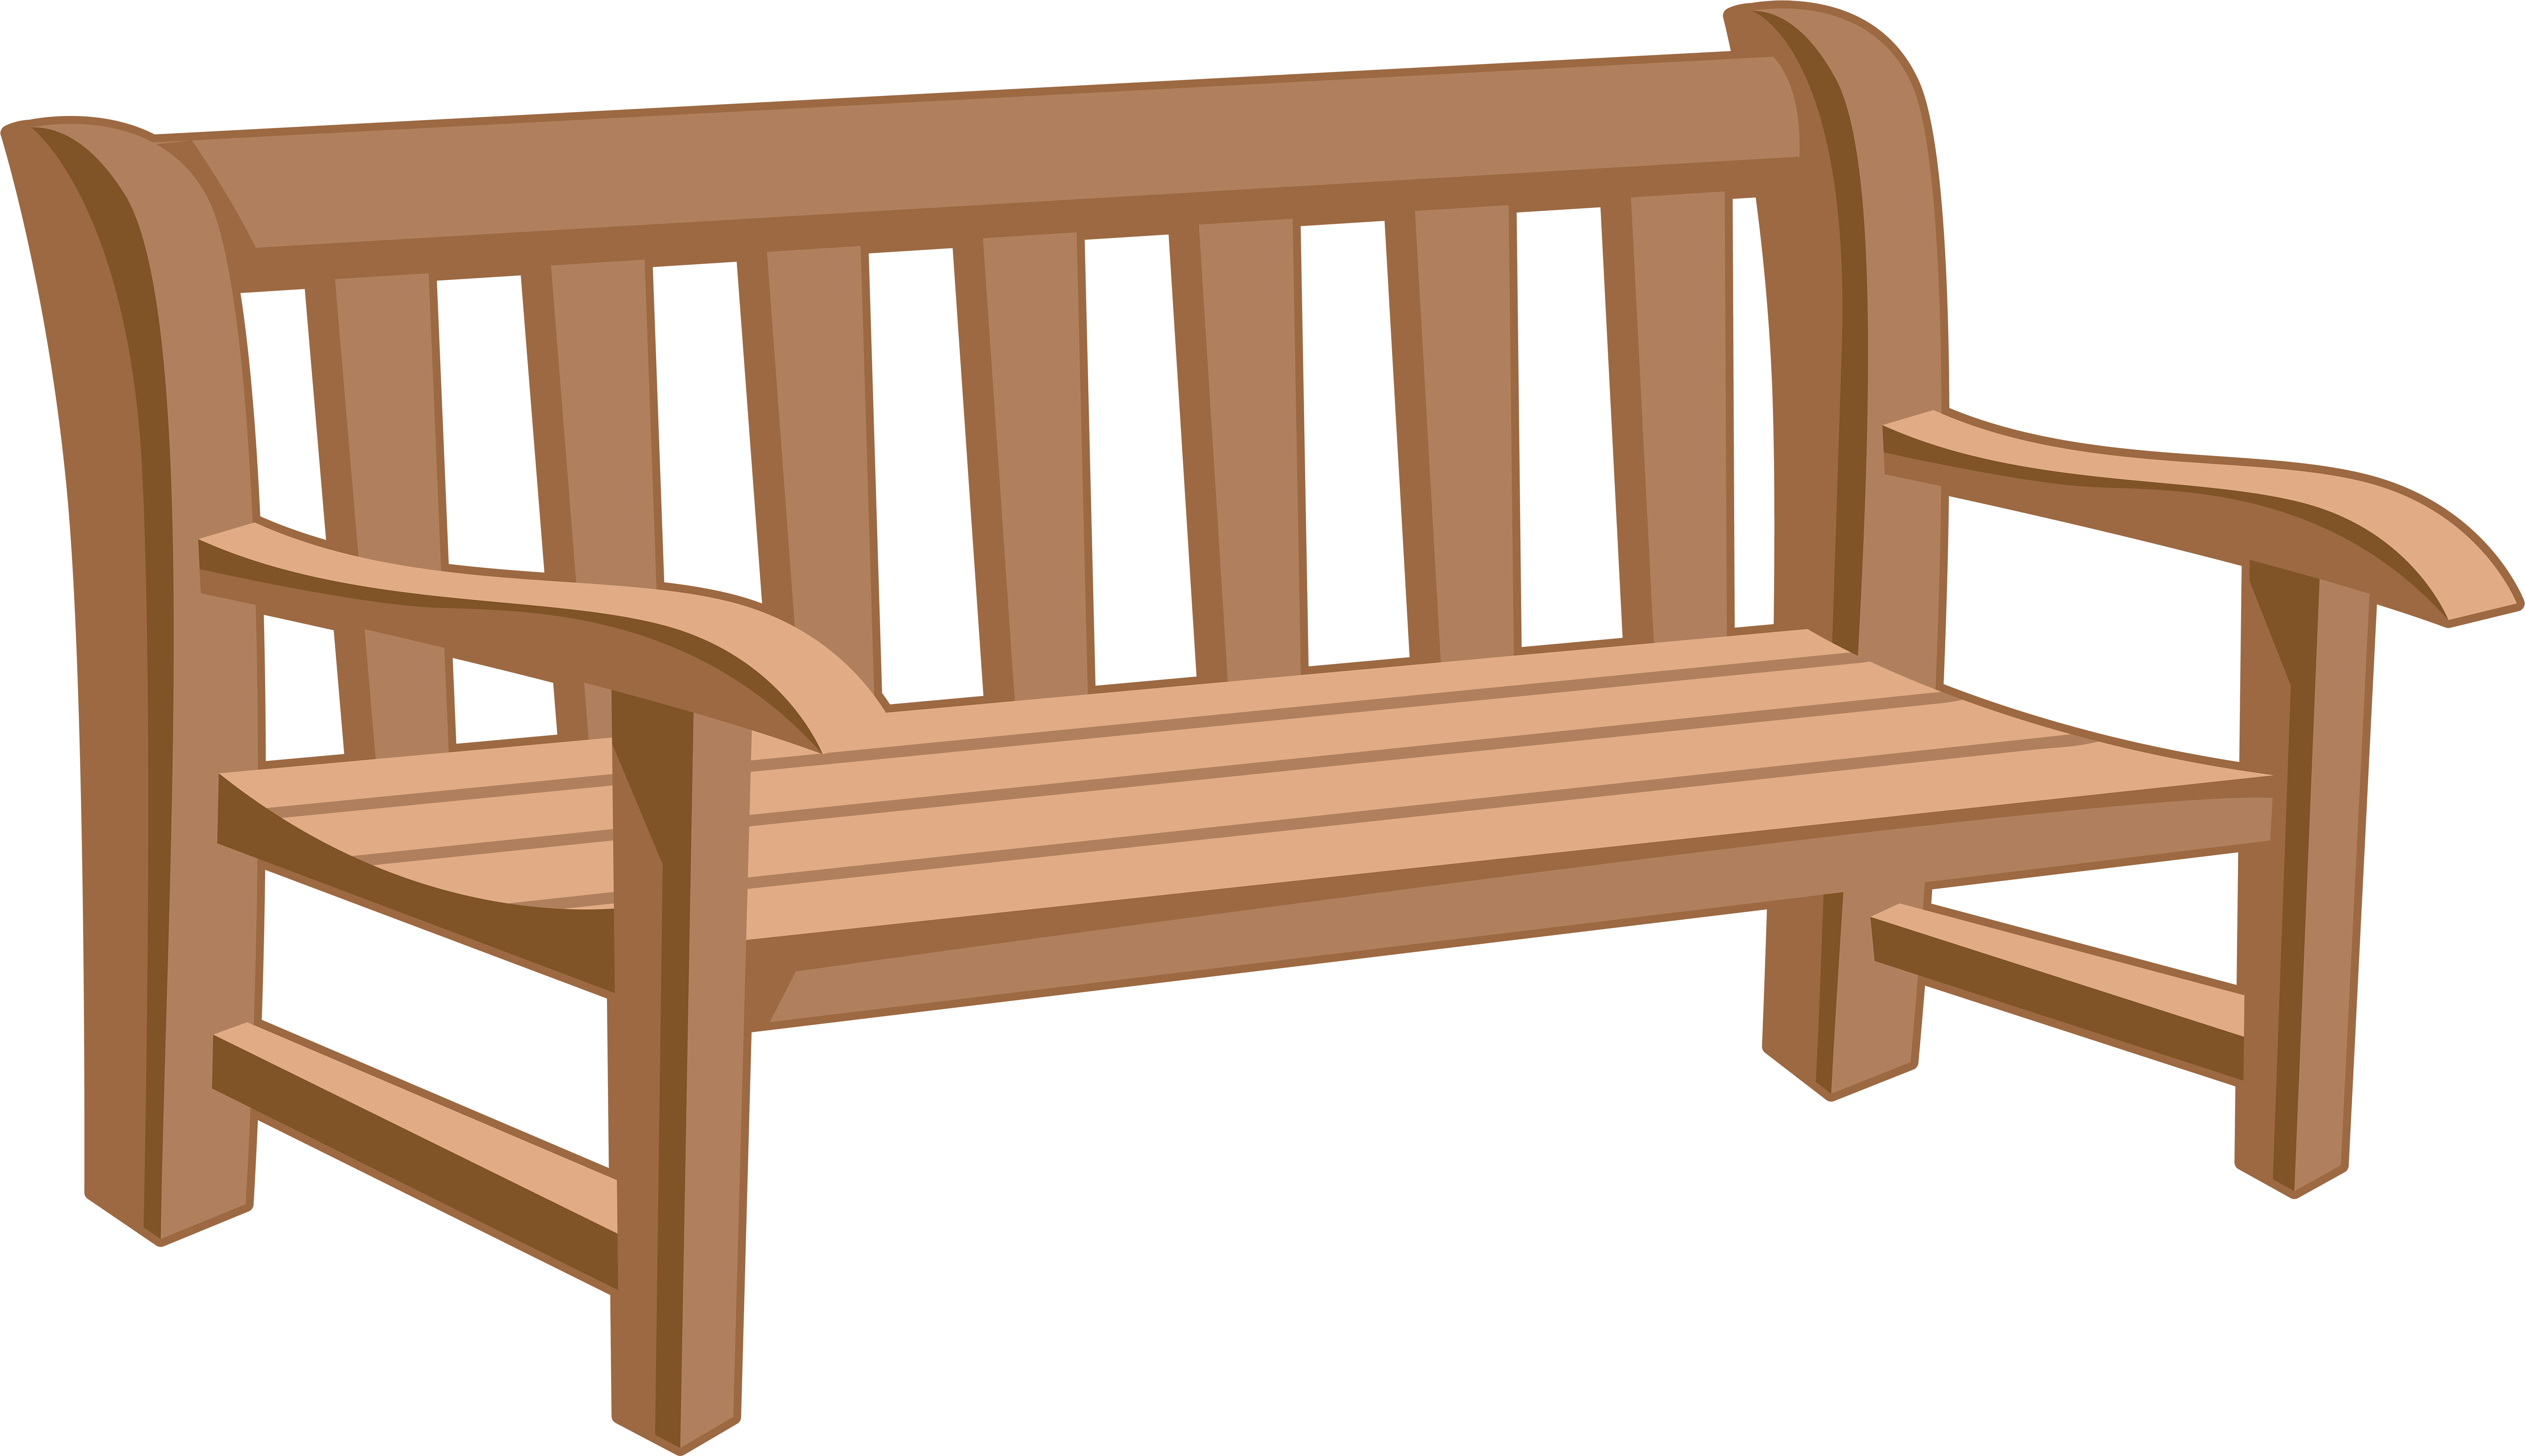 Park Bench Png Clip Art Image Gallery Yopriceville - Park Bench Png Clip Art Image Gallery Yopriceville (8000x4639)